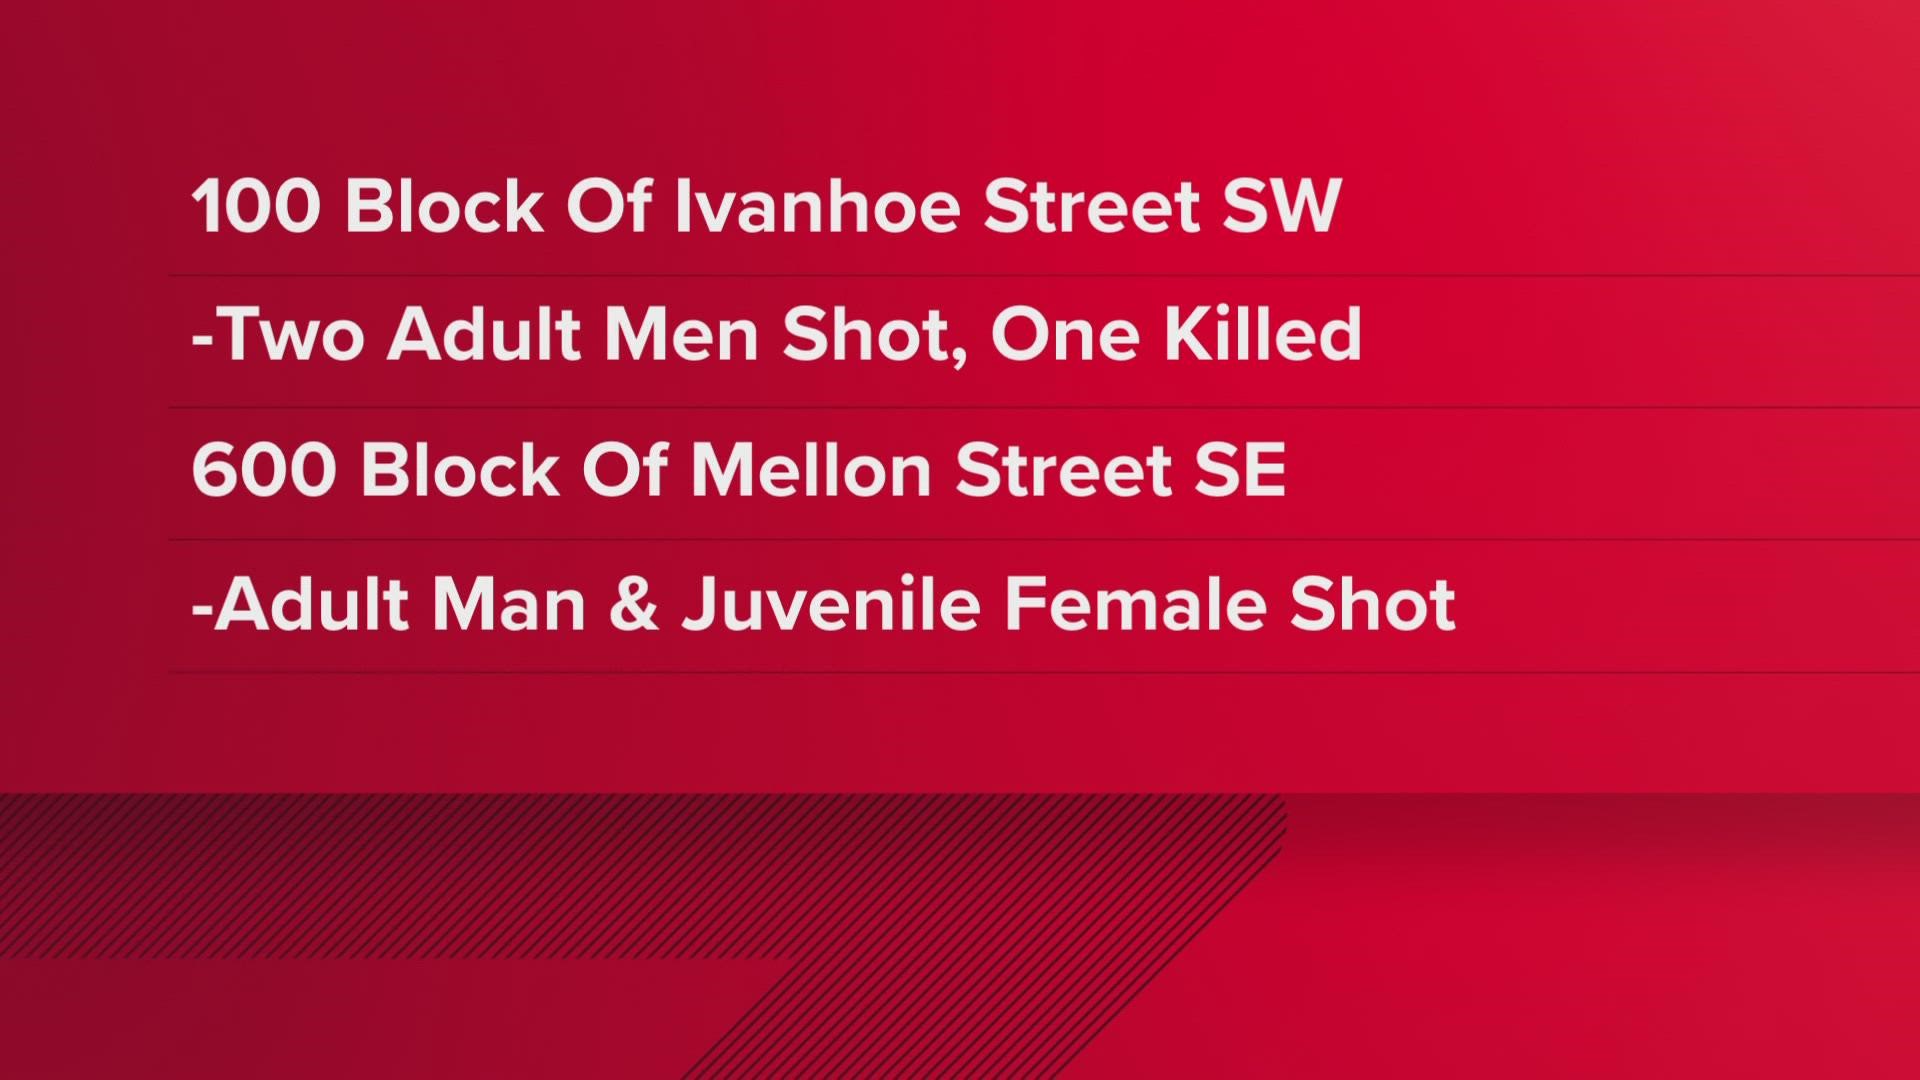 Two separate shootings that happened early Monday morning in Southwest and Southeast are under investigation, according to authorities.